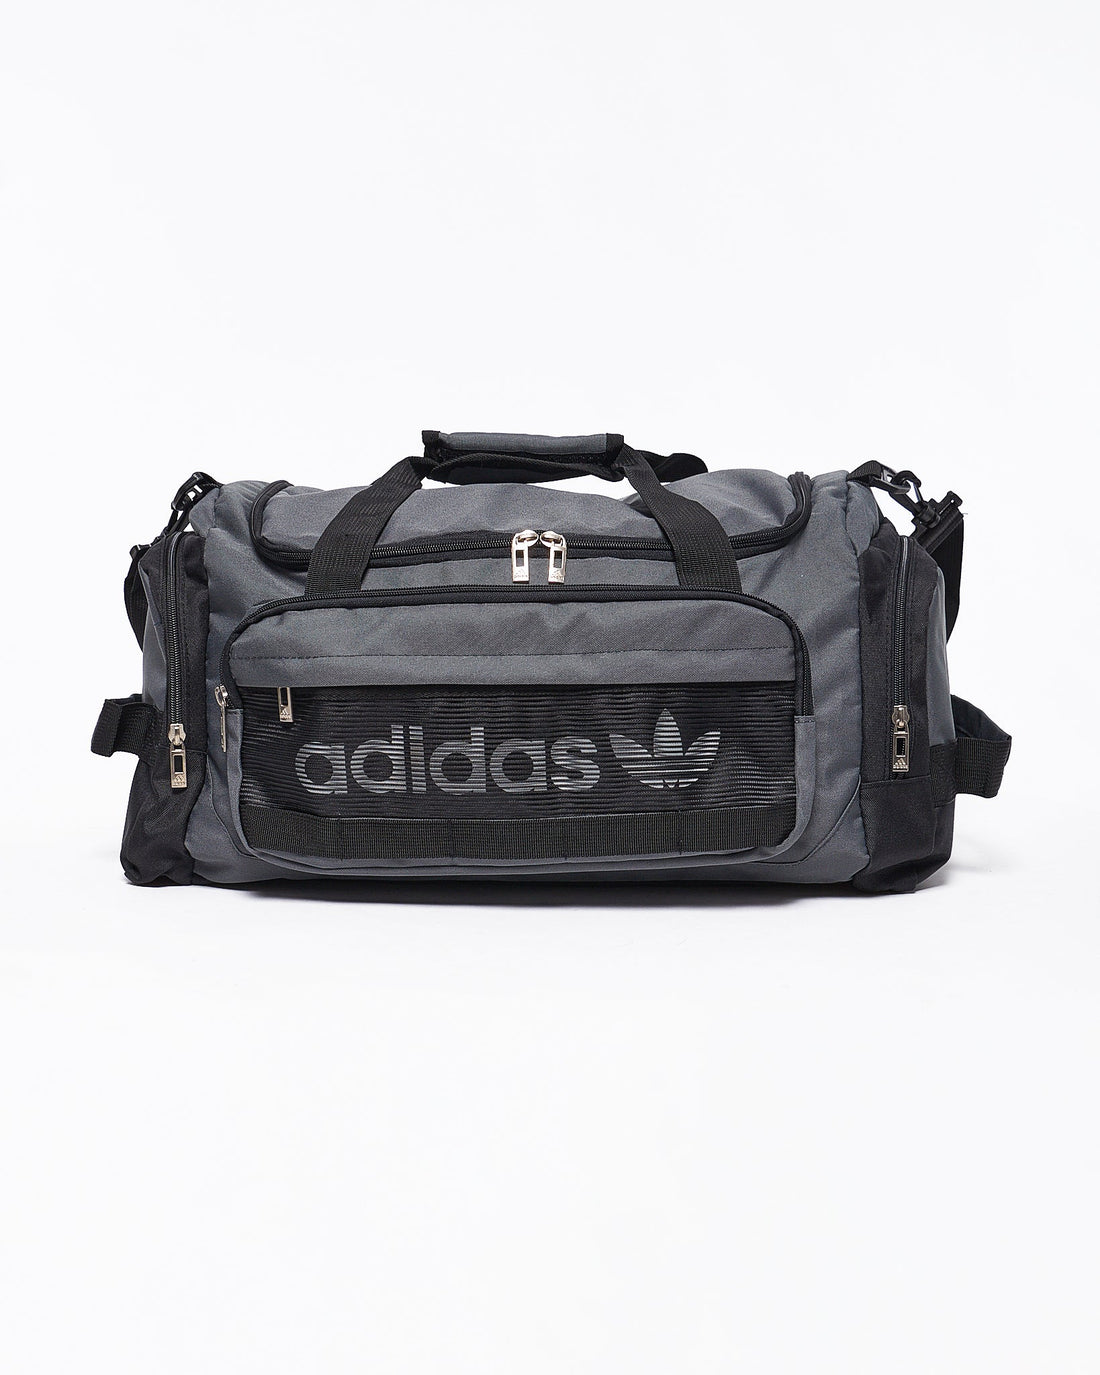 MOI OUTFIT-AD Logo Printed Unisex Duffle Bag 25.90